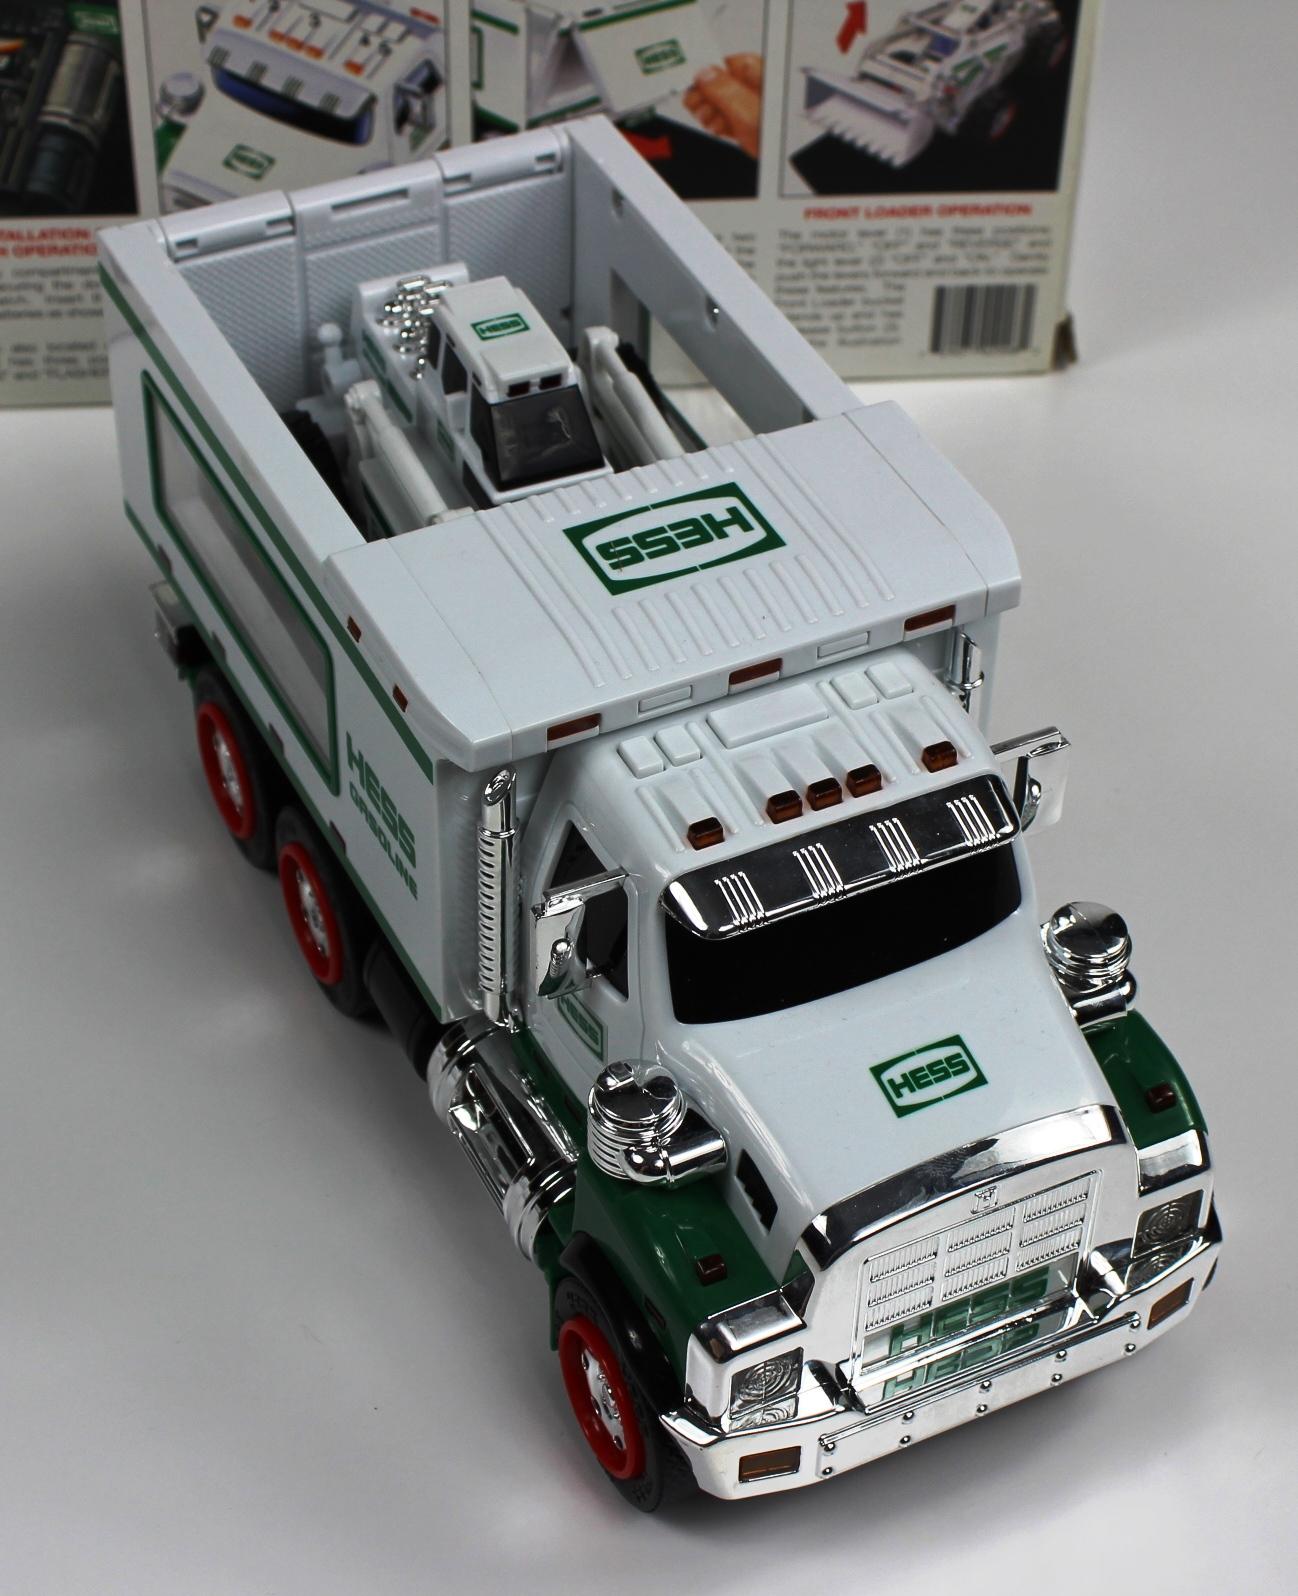 NEW HESS 2008 TOY TRUCK AND FRONT LOADER IN THE BOX